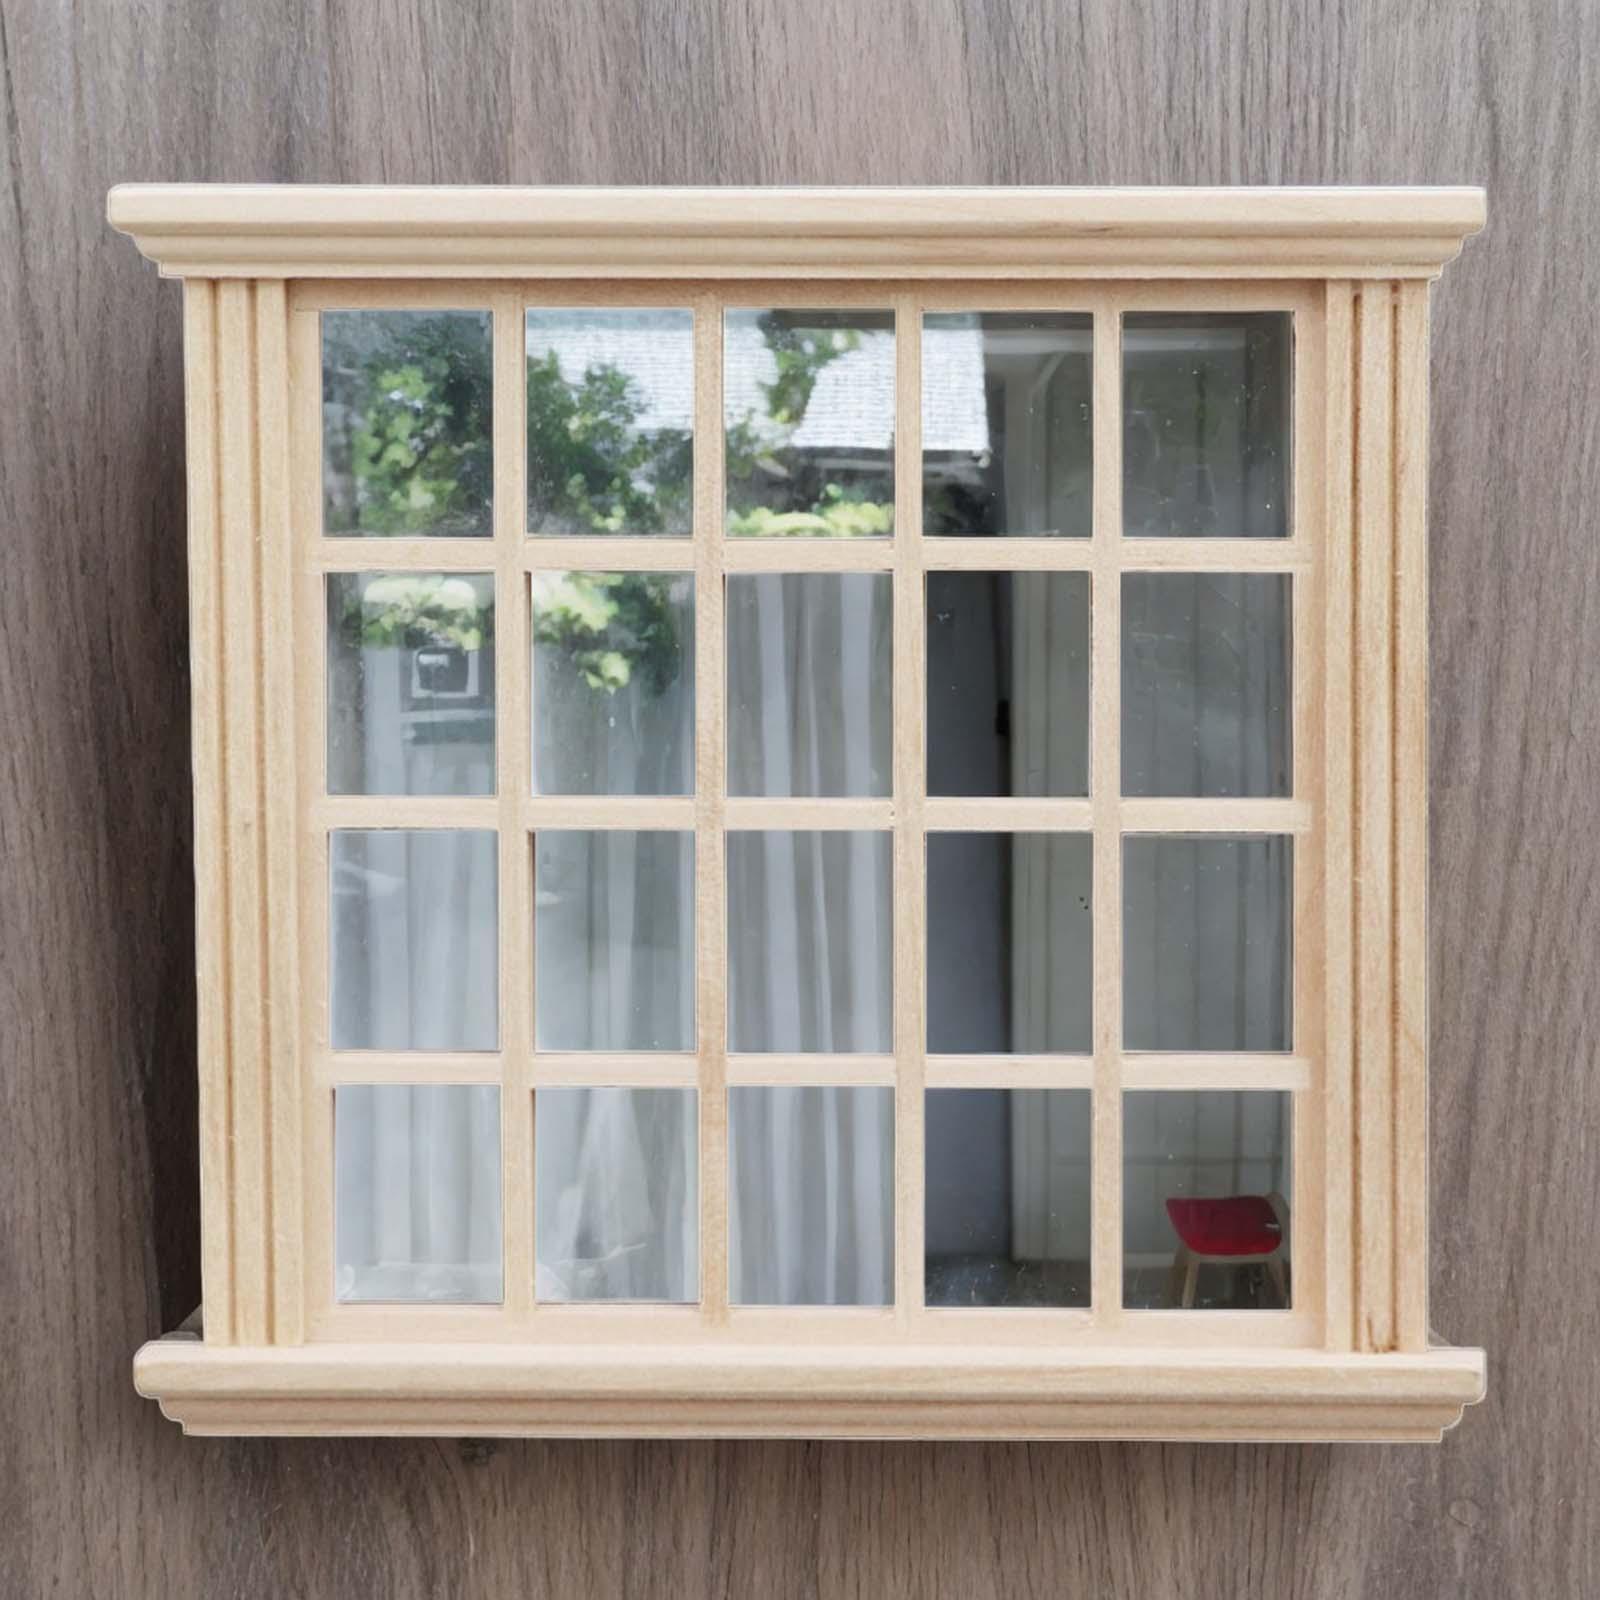 1/12 Dollhouse Miniature Window DIY for Doll Ornament Doll House Accessories